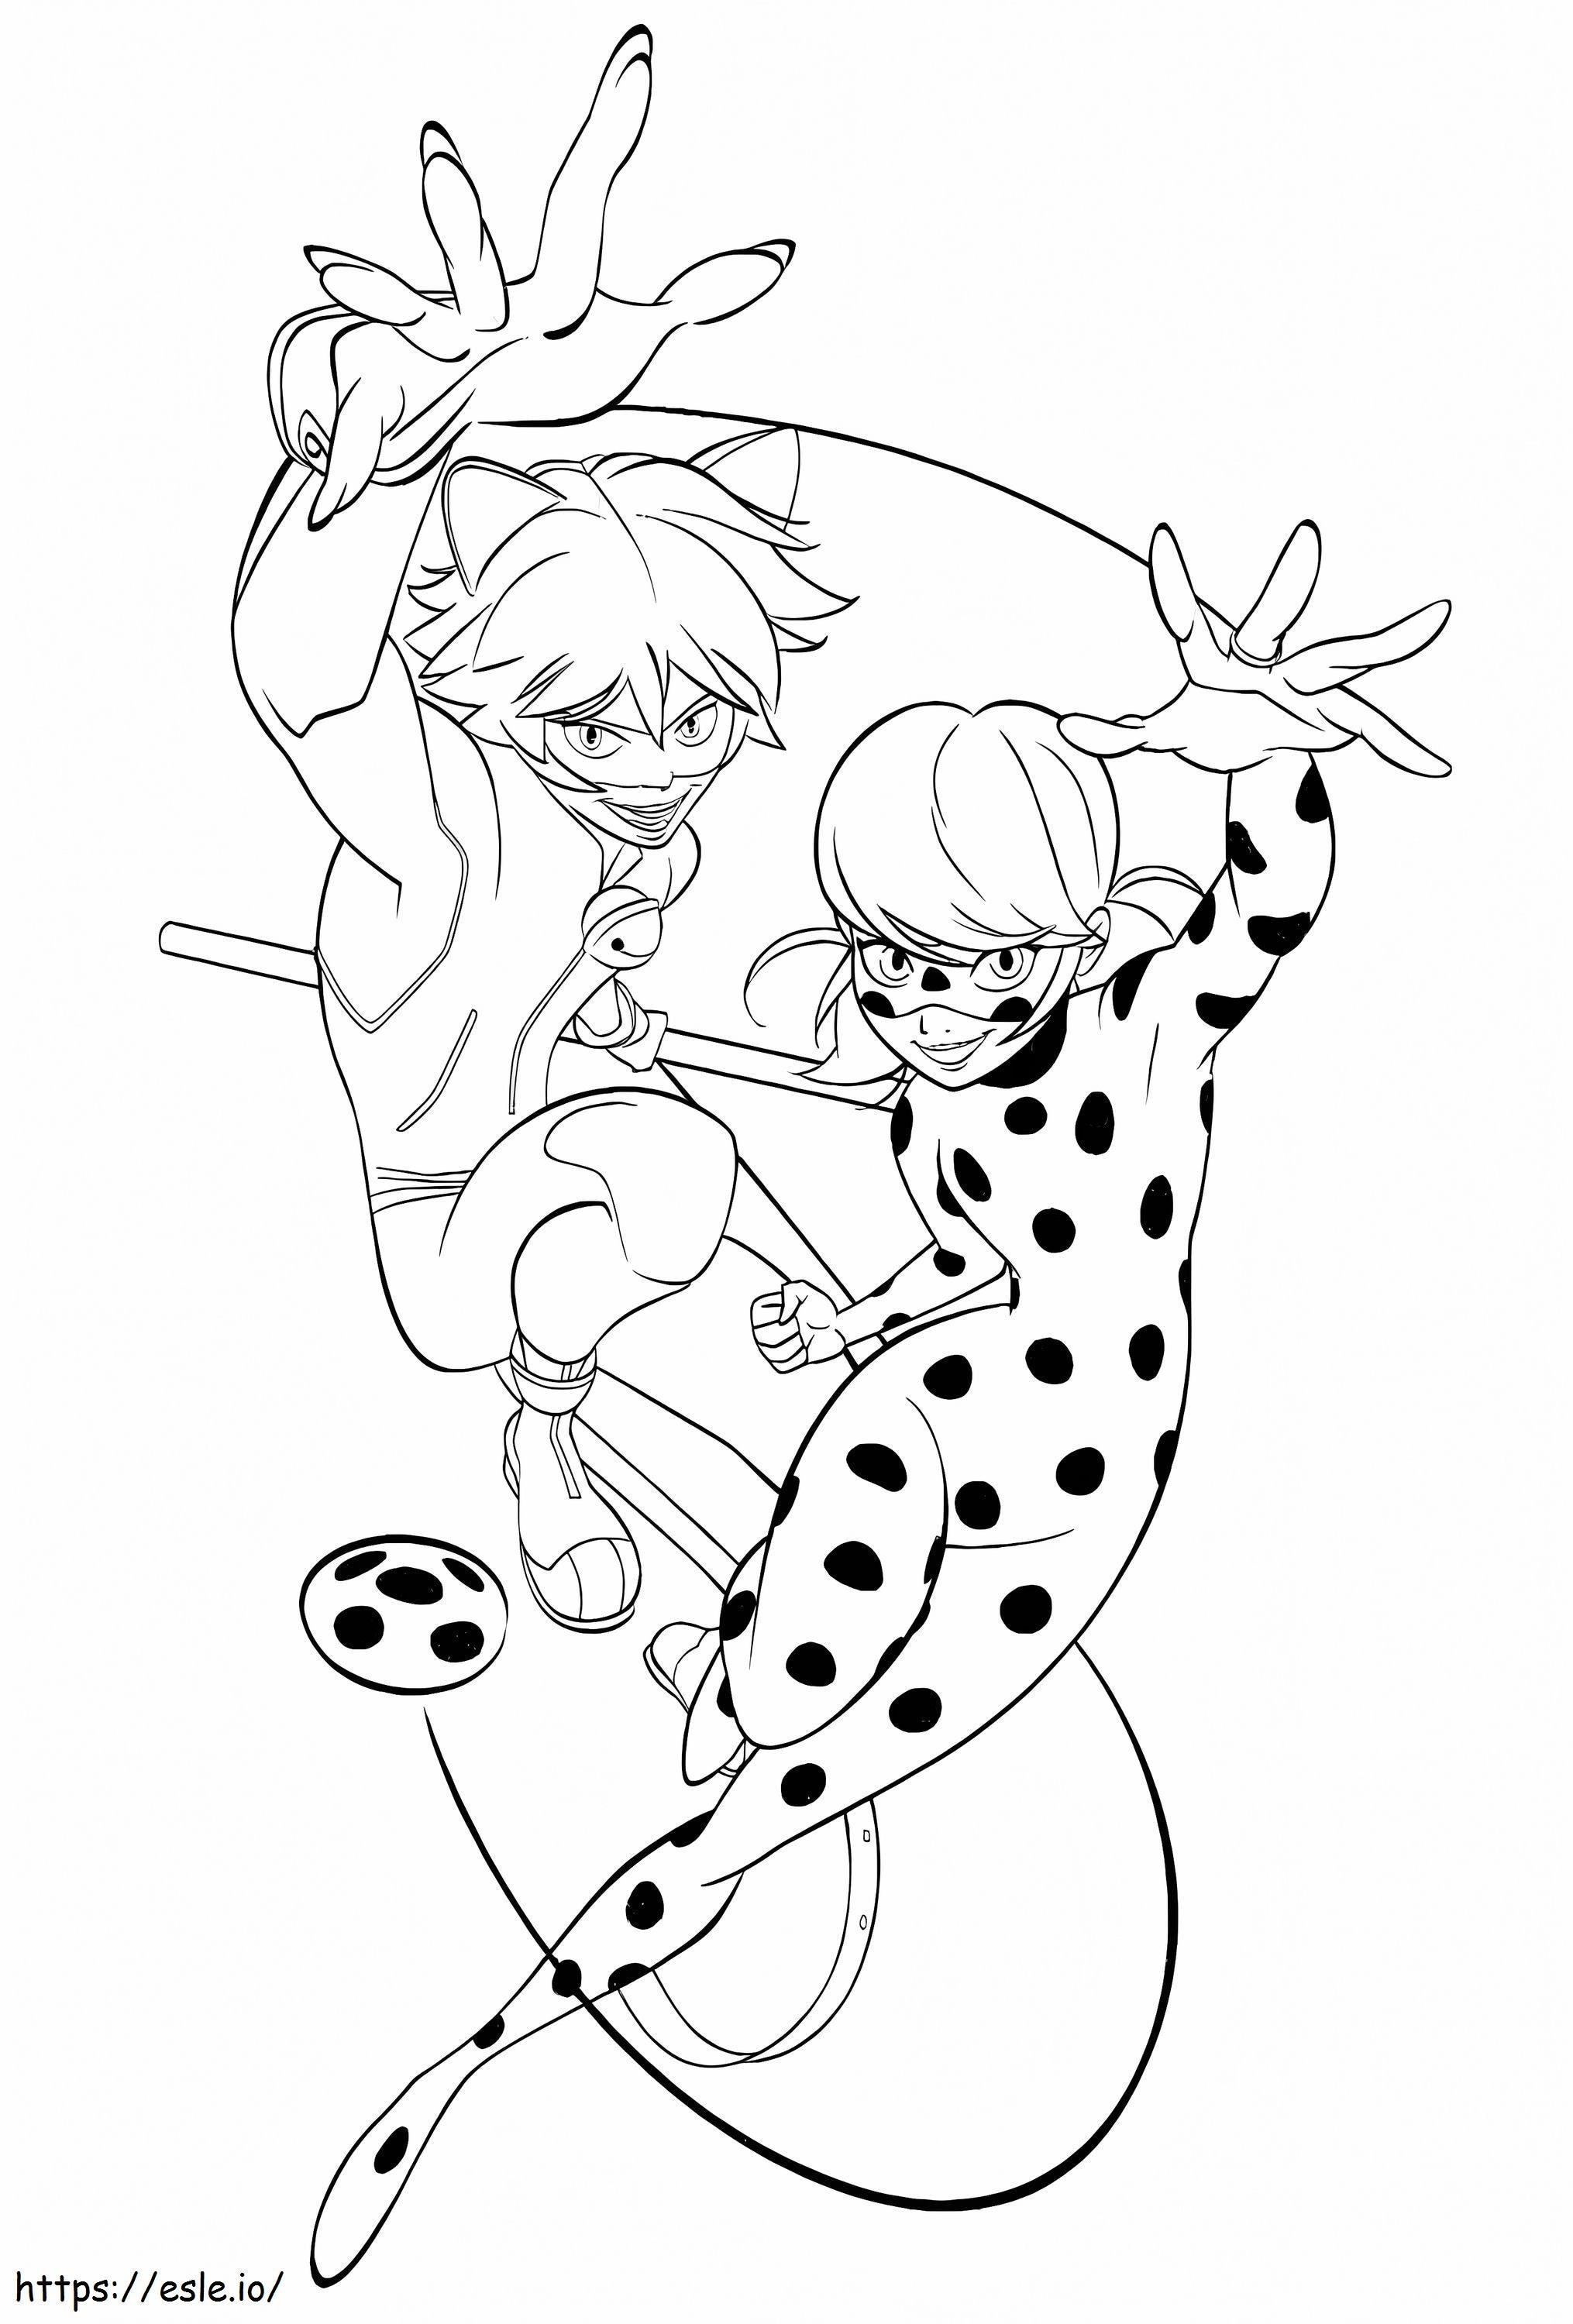 Printable Ladybug And Cat Noir coloring page